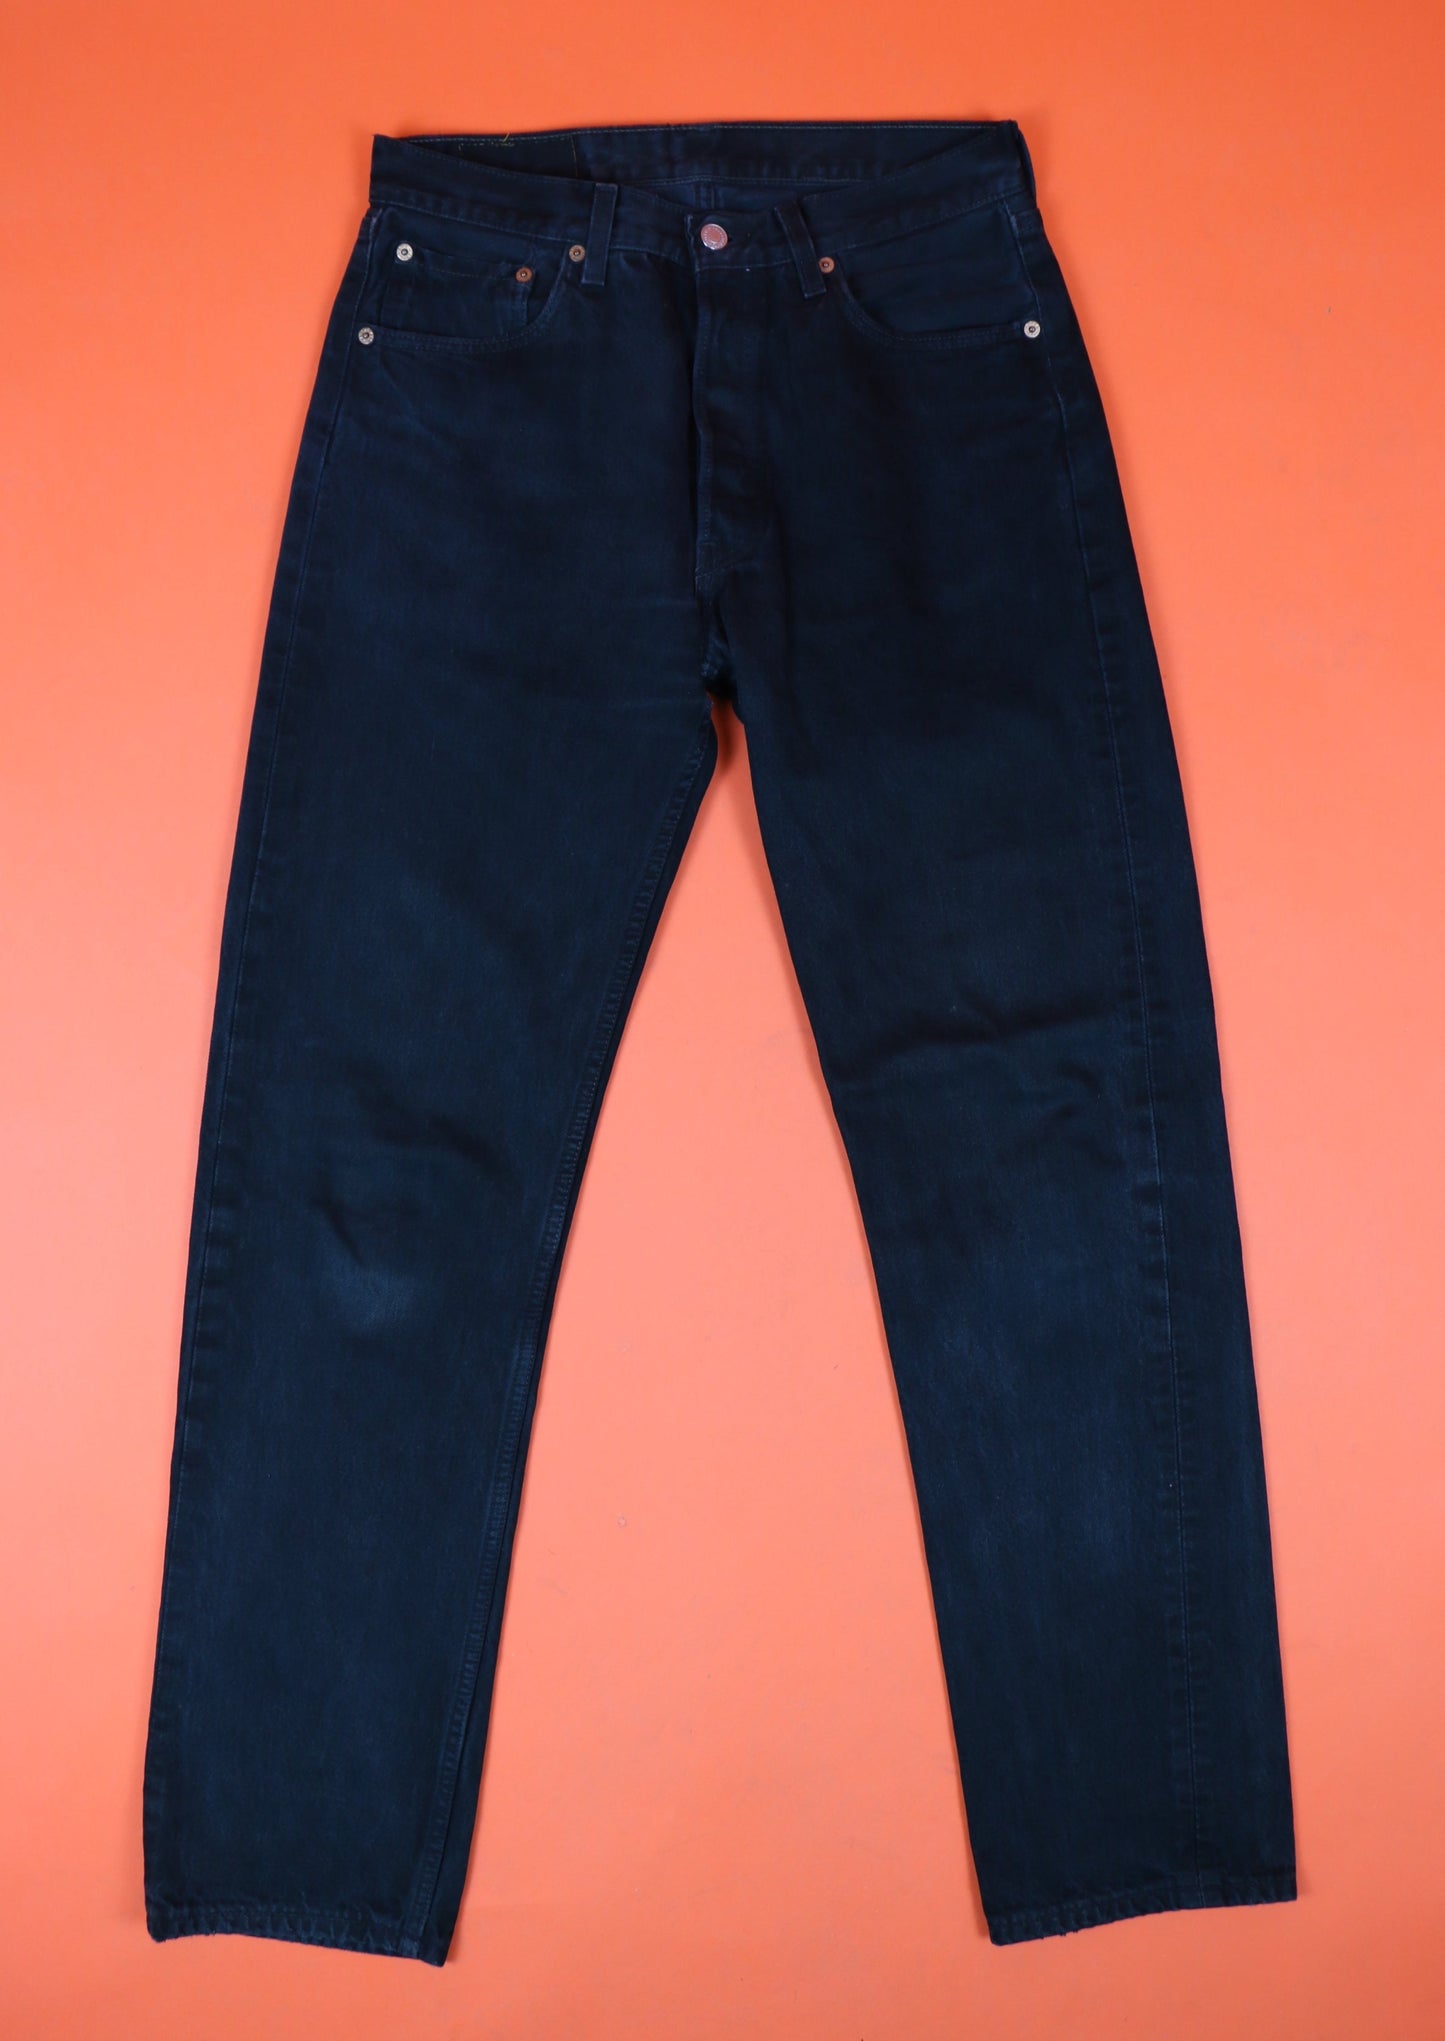 Levi's 501 Made in U.S.A. Jeans W32 L34 - vintage clothing clochard92.com